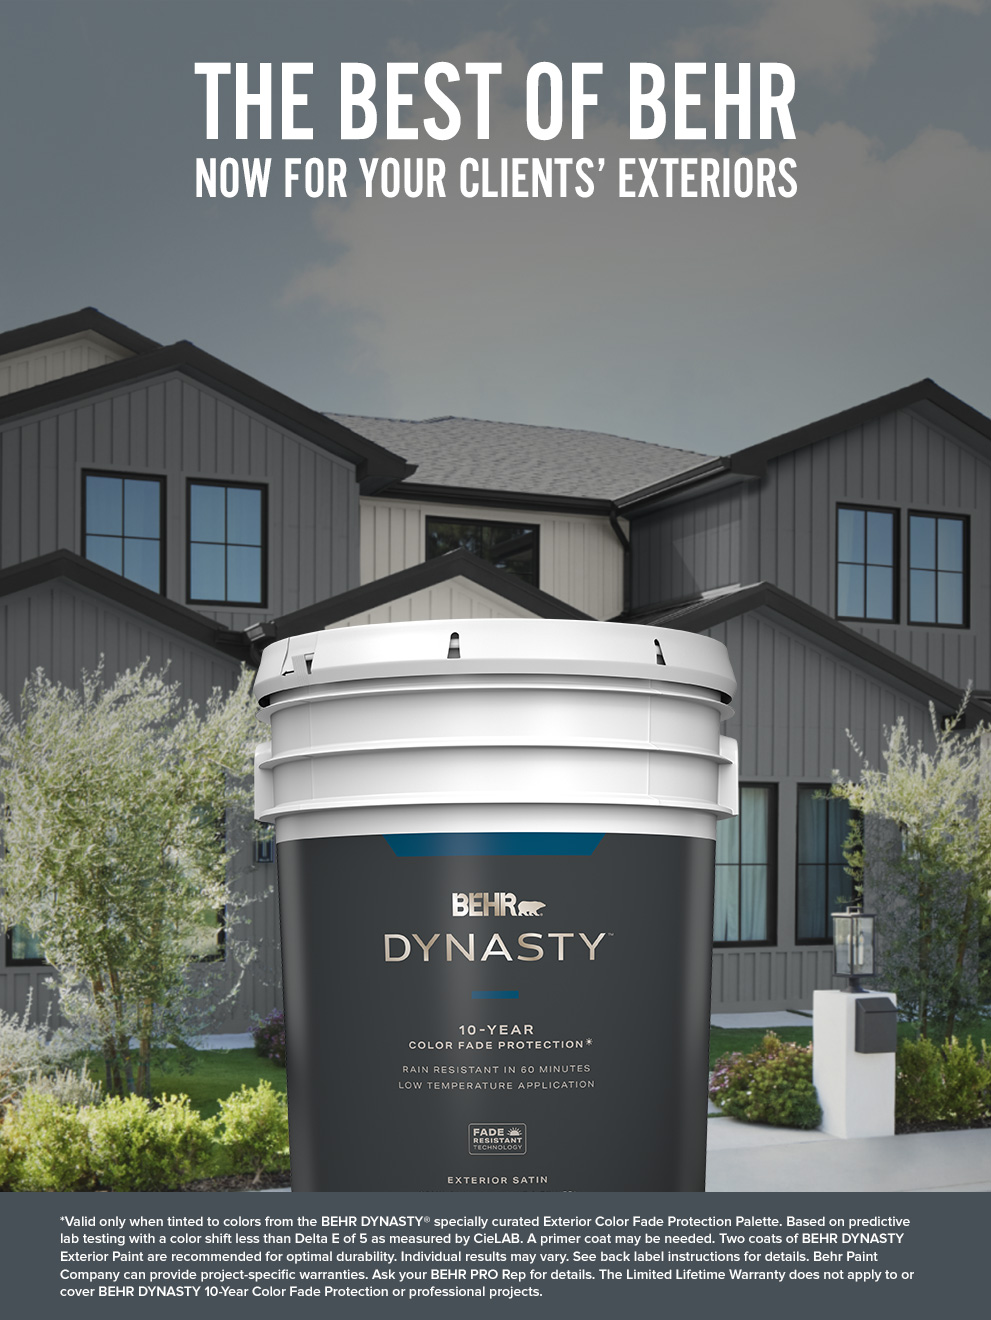 BEHR DYNASTY - Clients Deserve Your Best, You deserve ours.